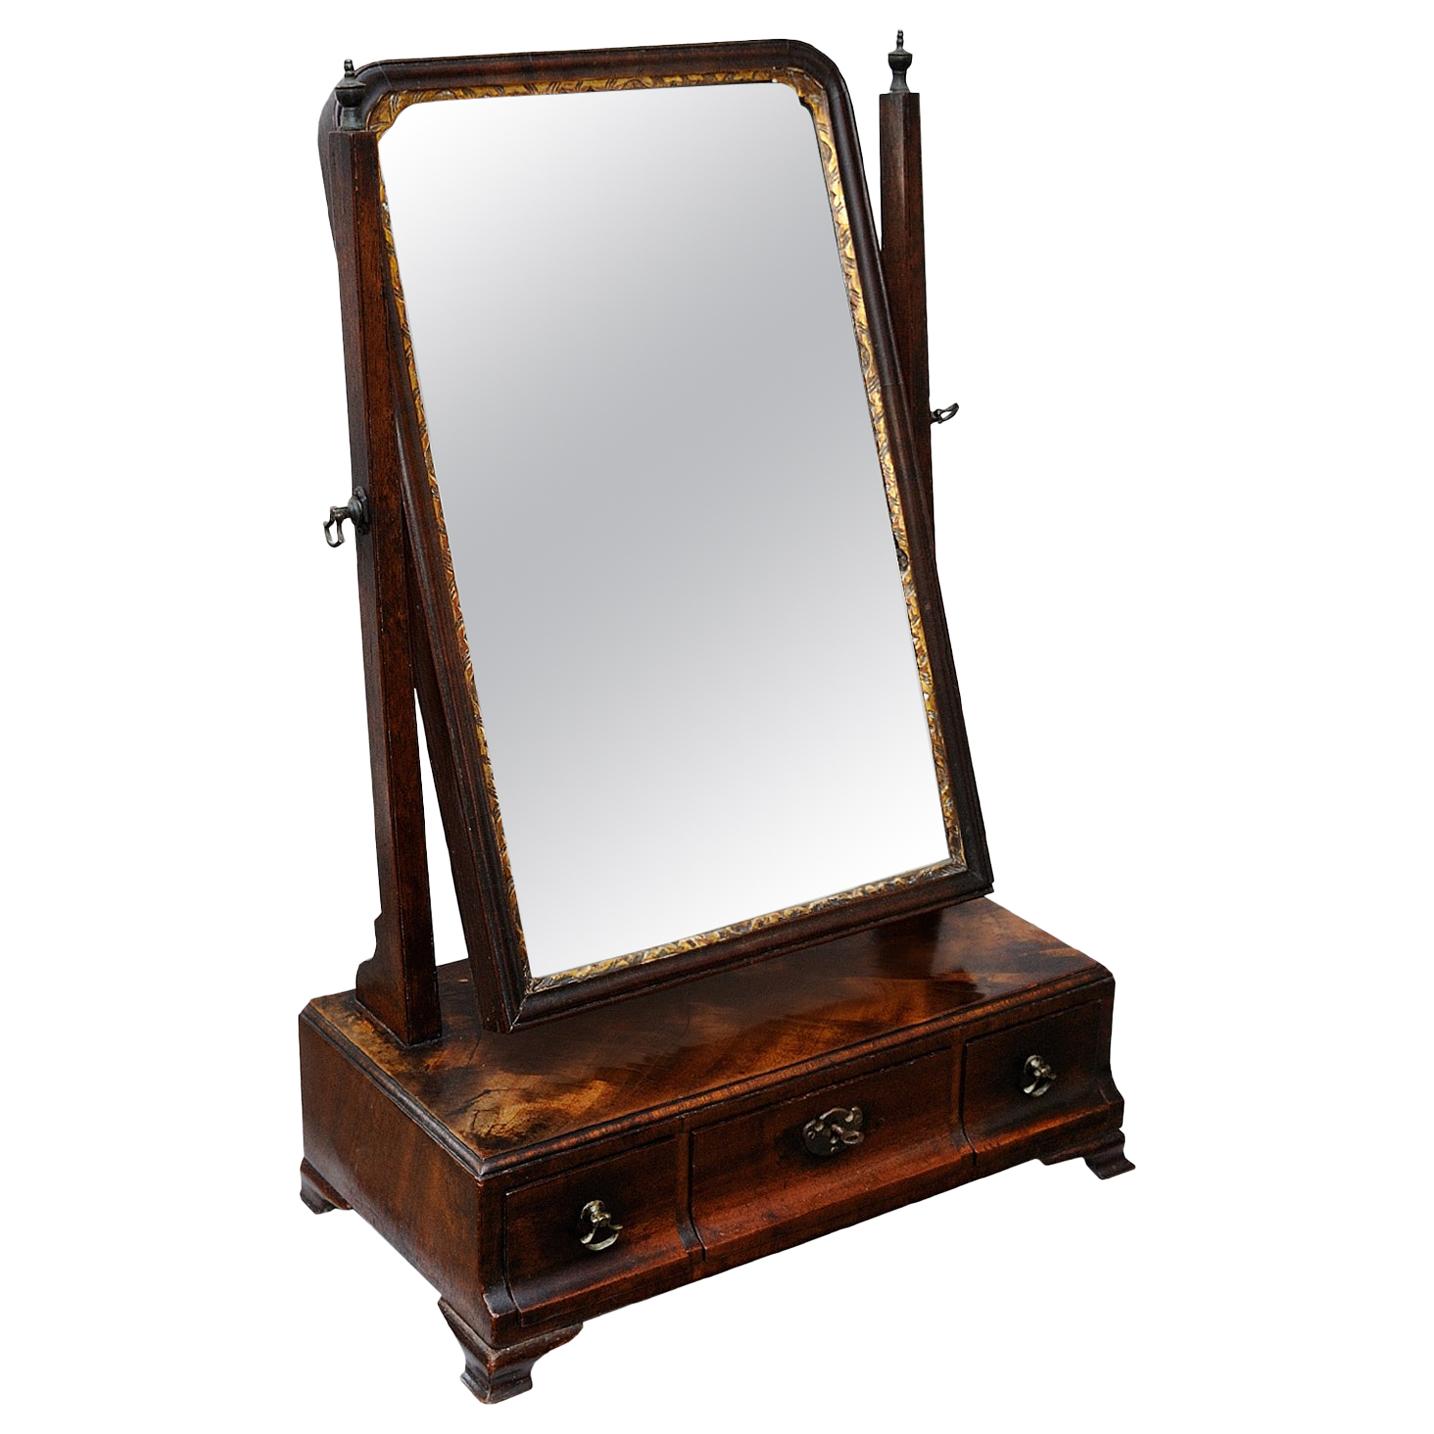 English George II Transitional Flame Mahogany Toilet Mirror, circa 1730 For Sale